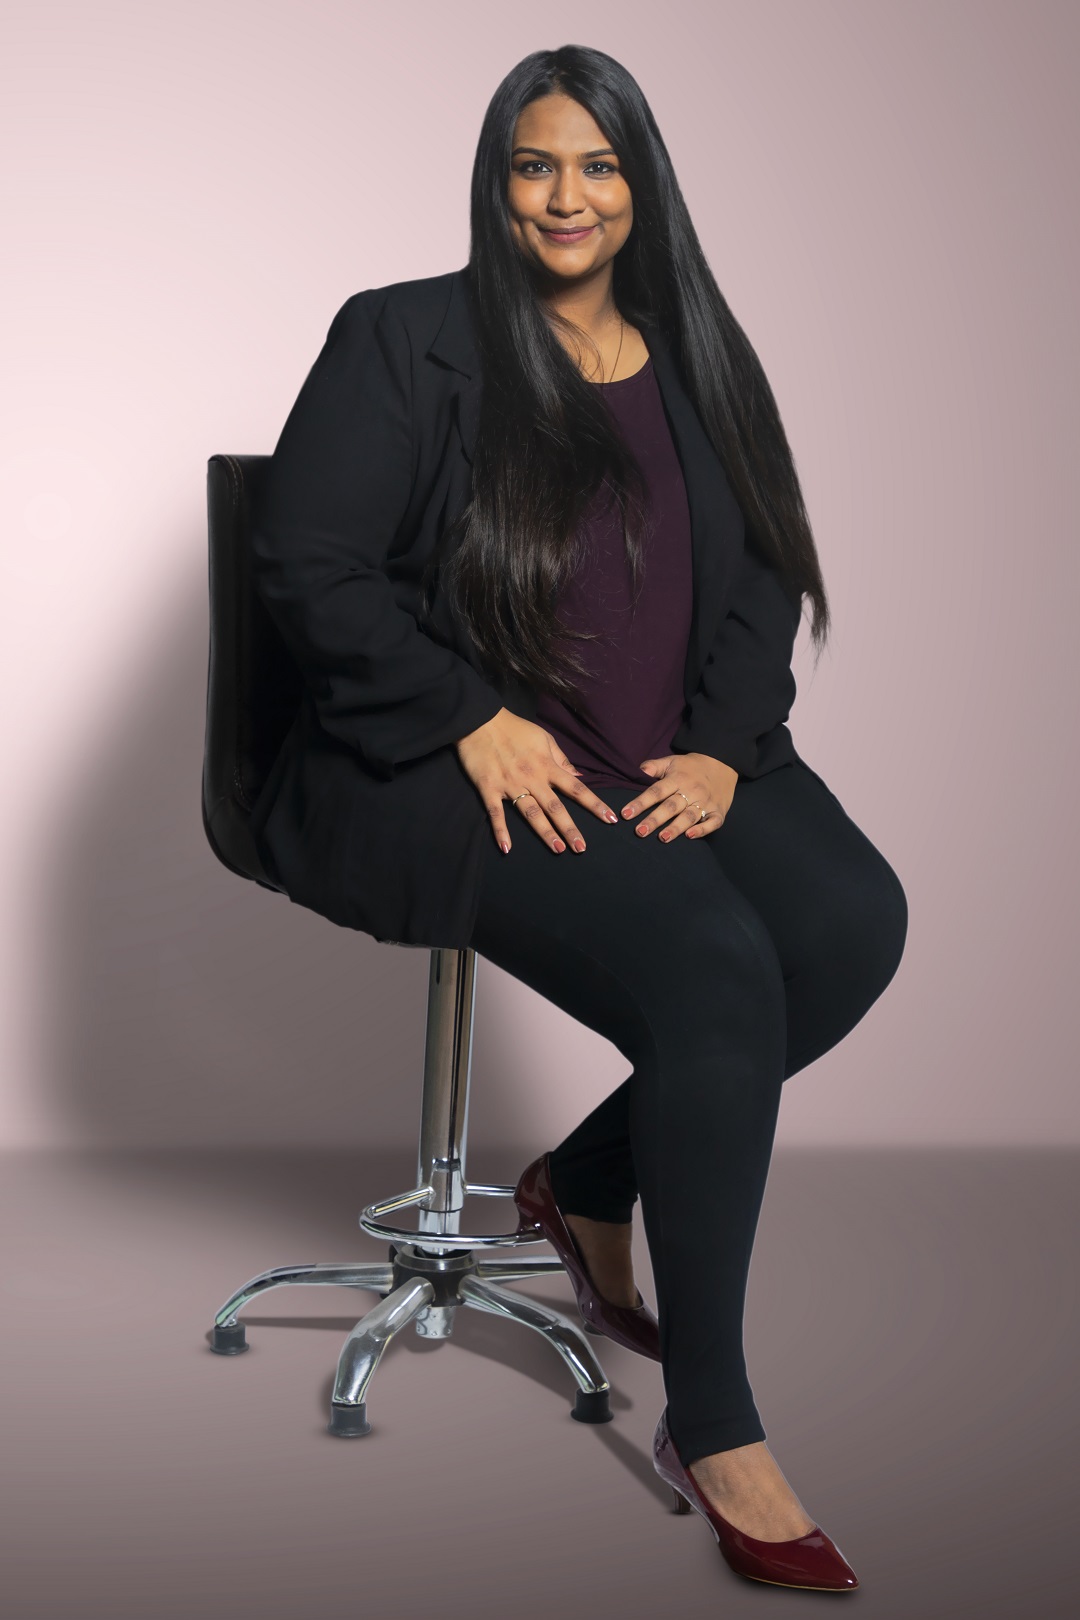 Anushka Iyer, Founder and CEO, Wiggles